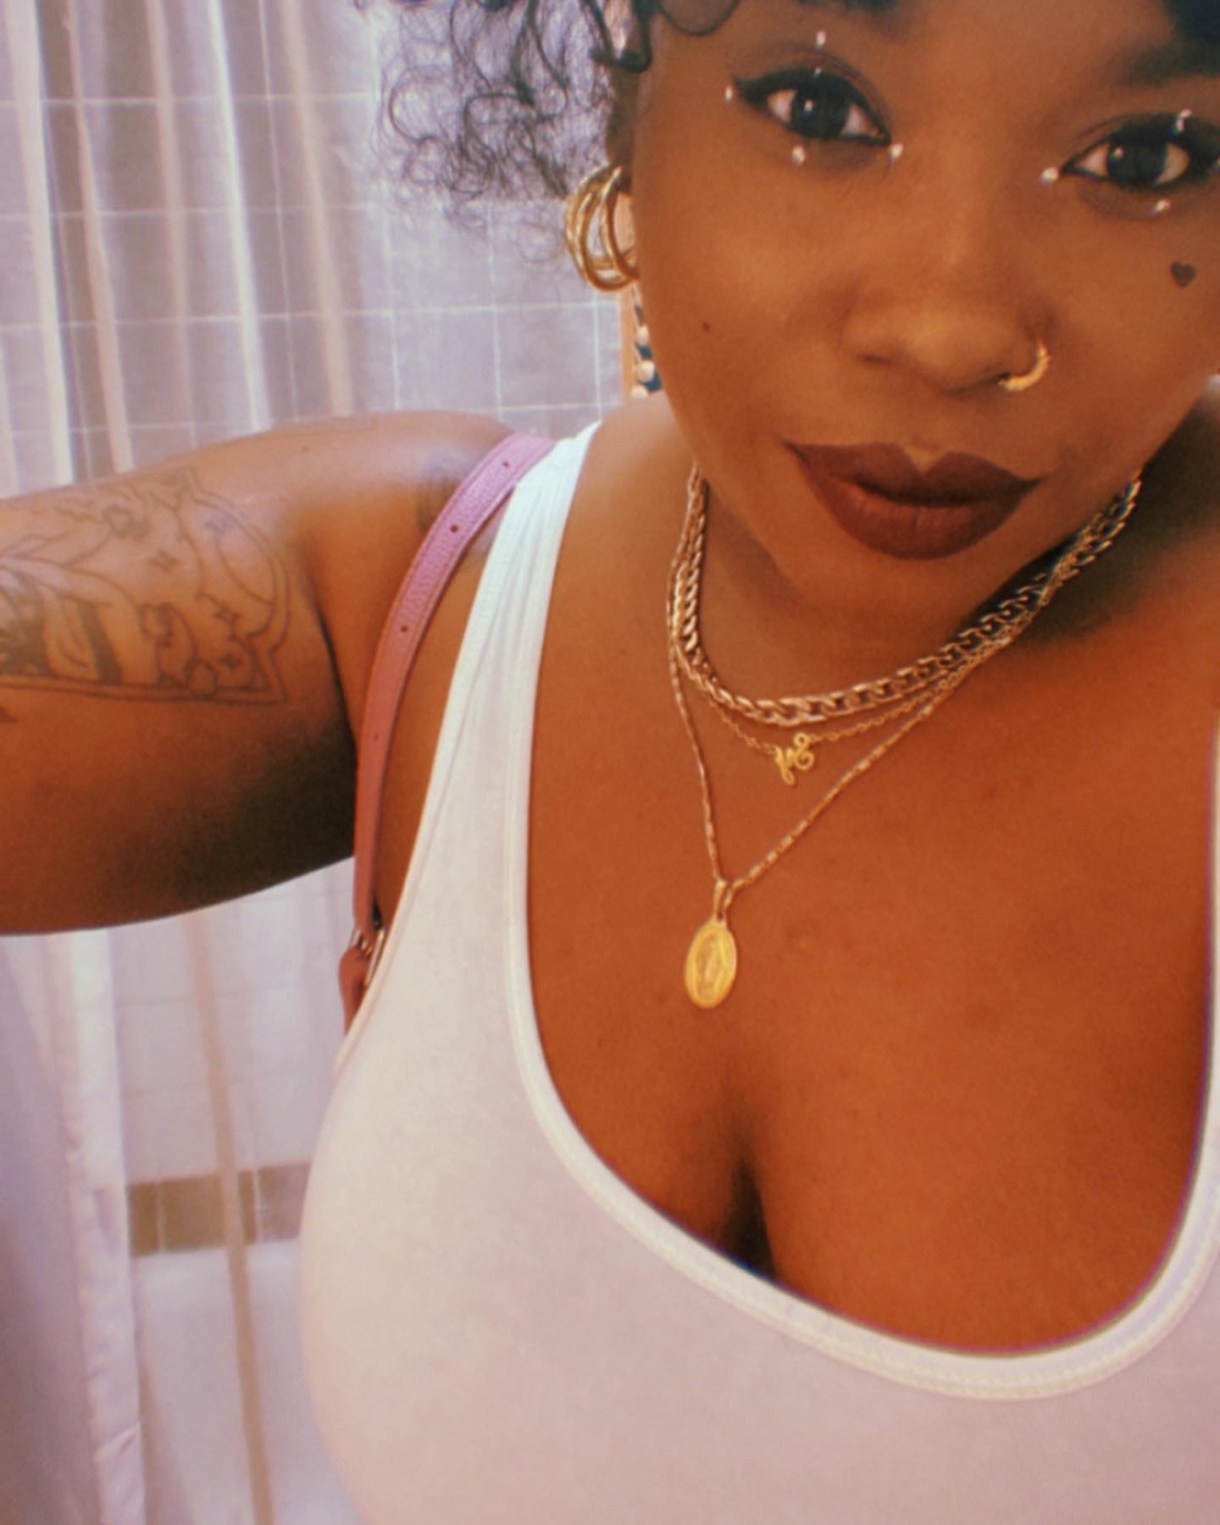 Shelli is wearing gold jewelr, a white tank top, and an amazing makeup situation with burgundy lips and white dots around her eyes. Shelli is a Black woman and a tattoo is visible on her arm.